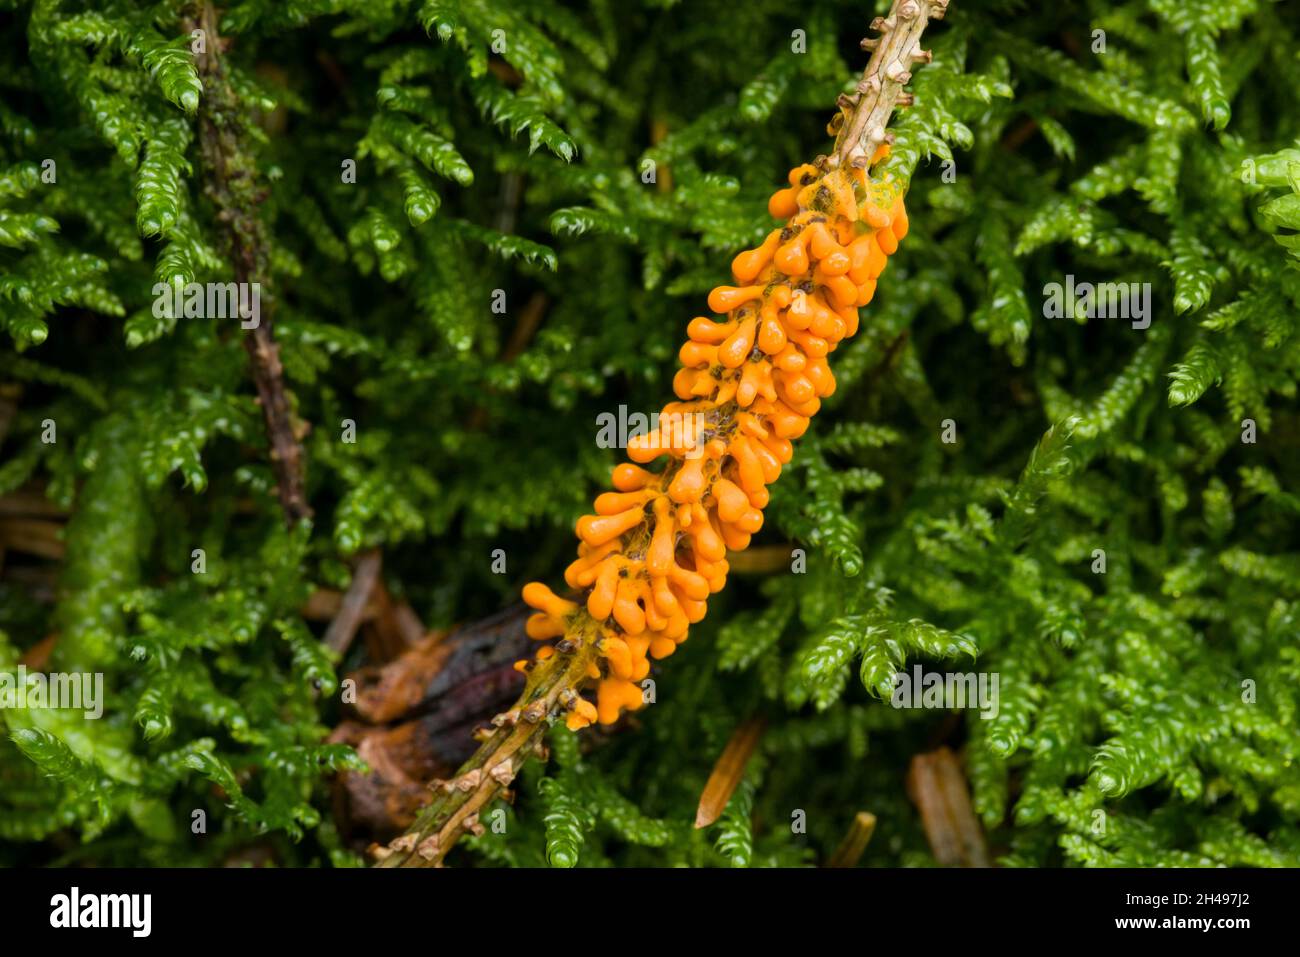 Egg-shell Slime Mould (Leocarpus fragilis) fruiting bodies in a woodland in the Mendip Hills, Somerset, England. Stock Photo